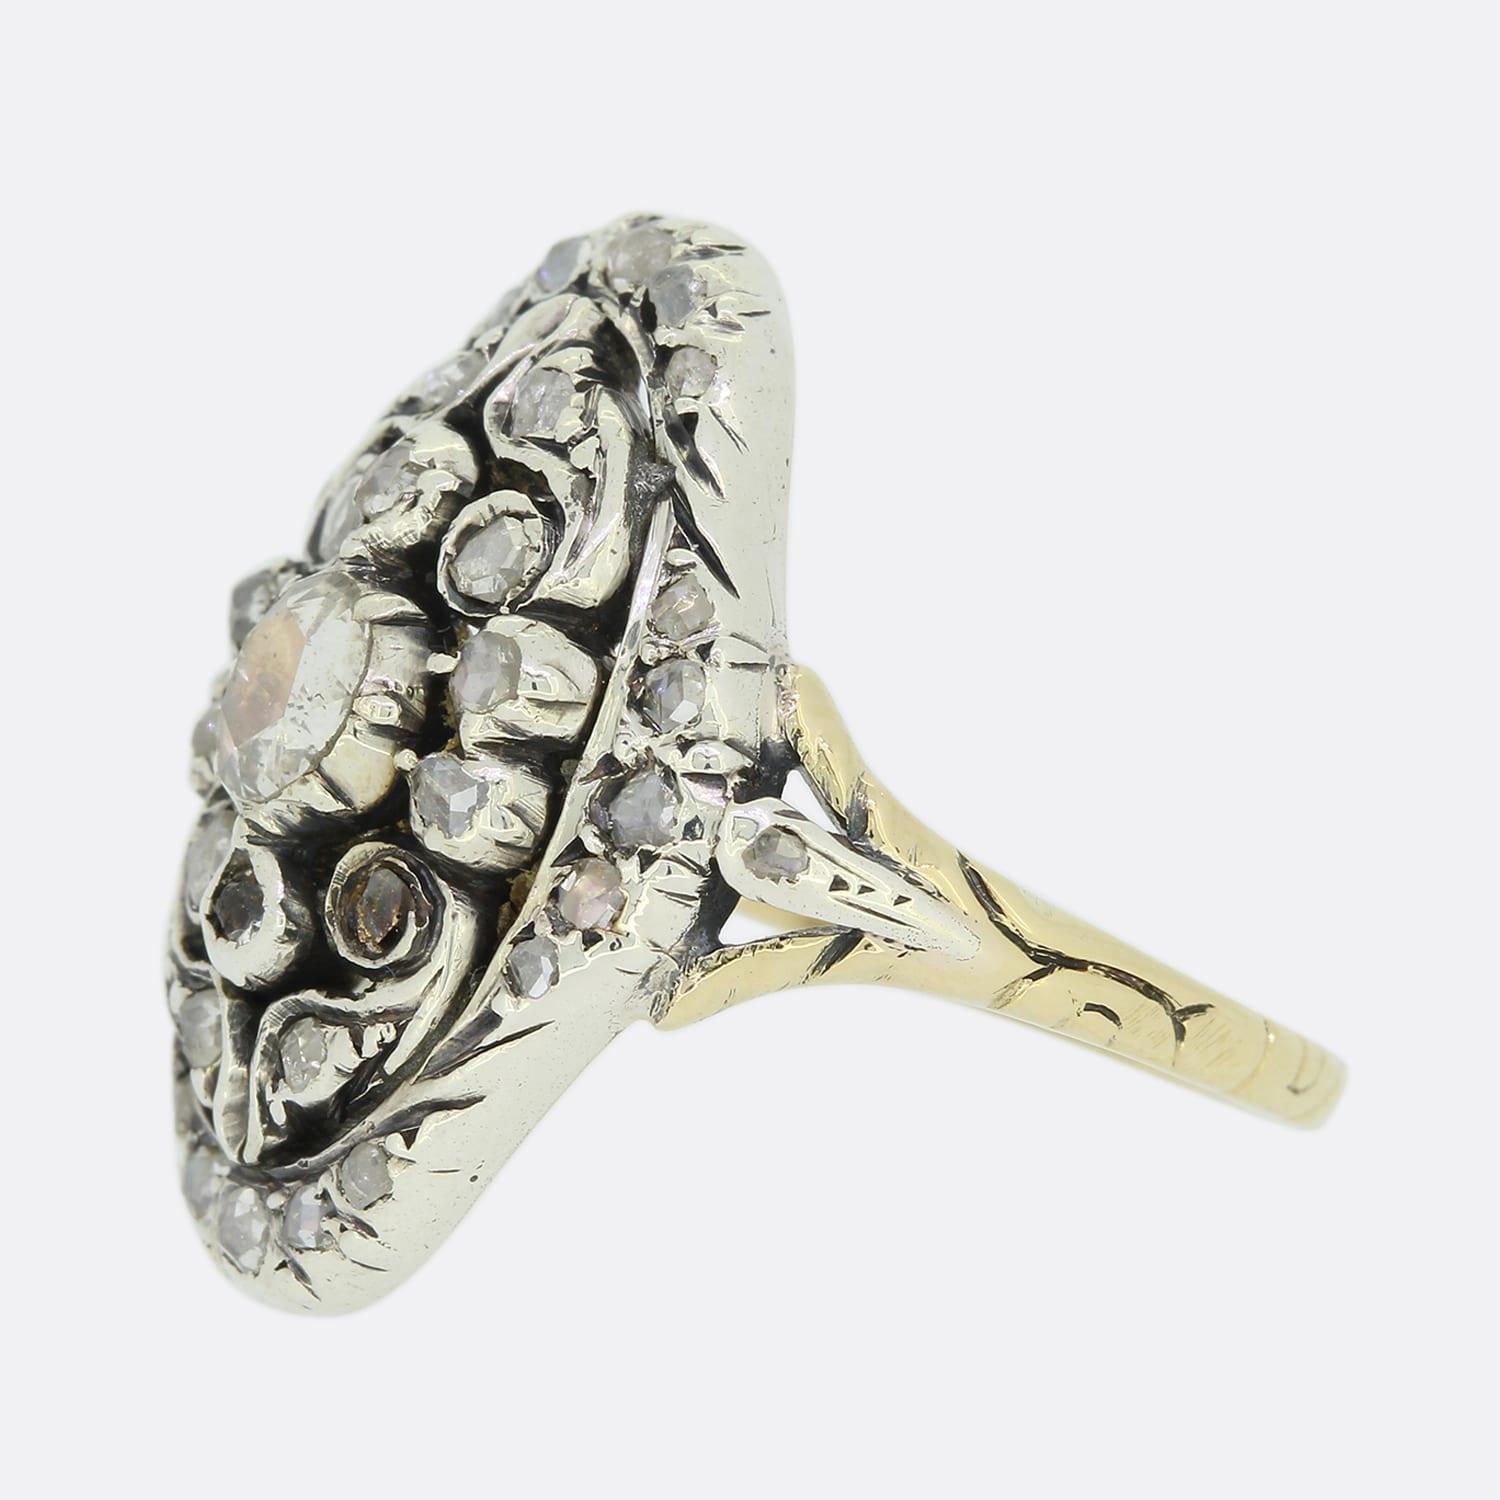 This is a Victorian rose cut diamond navette ring. The ring is set with multiple rose cut diamonds in a navette shaped setting crafted in silver with a 15ct yellow gold decorative band.

Condition: Used (Very Good)
Weight: 4.8 grams
Ring Size: M